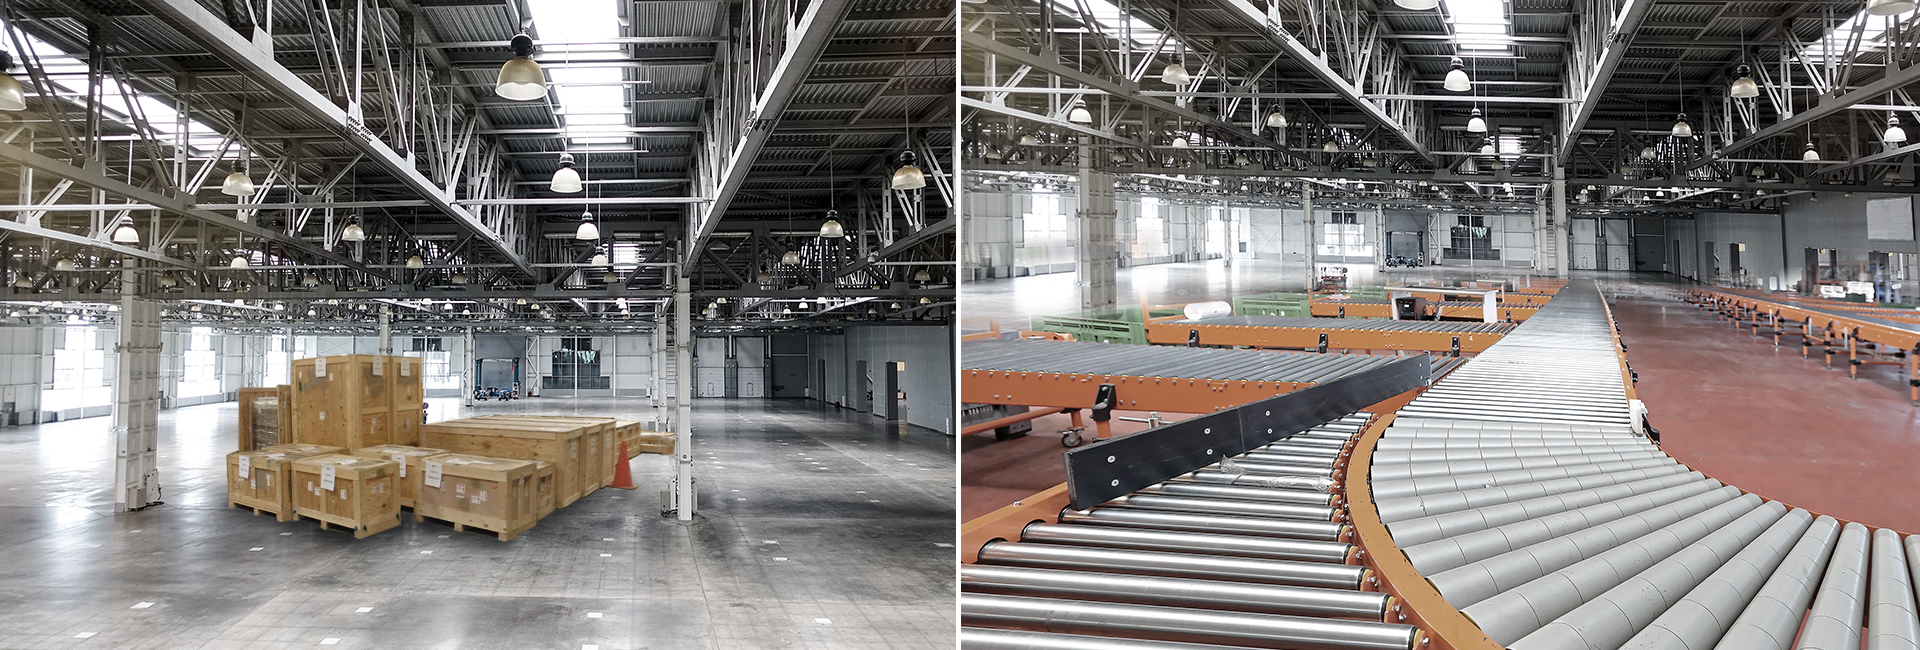 Two pictures of a conveyor belt in a warehouse.